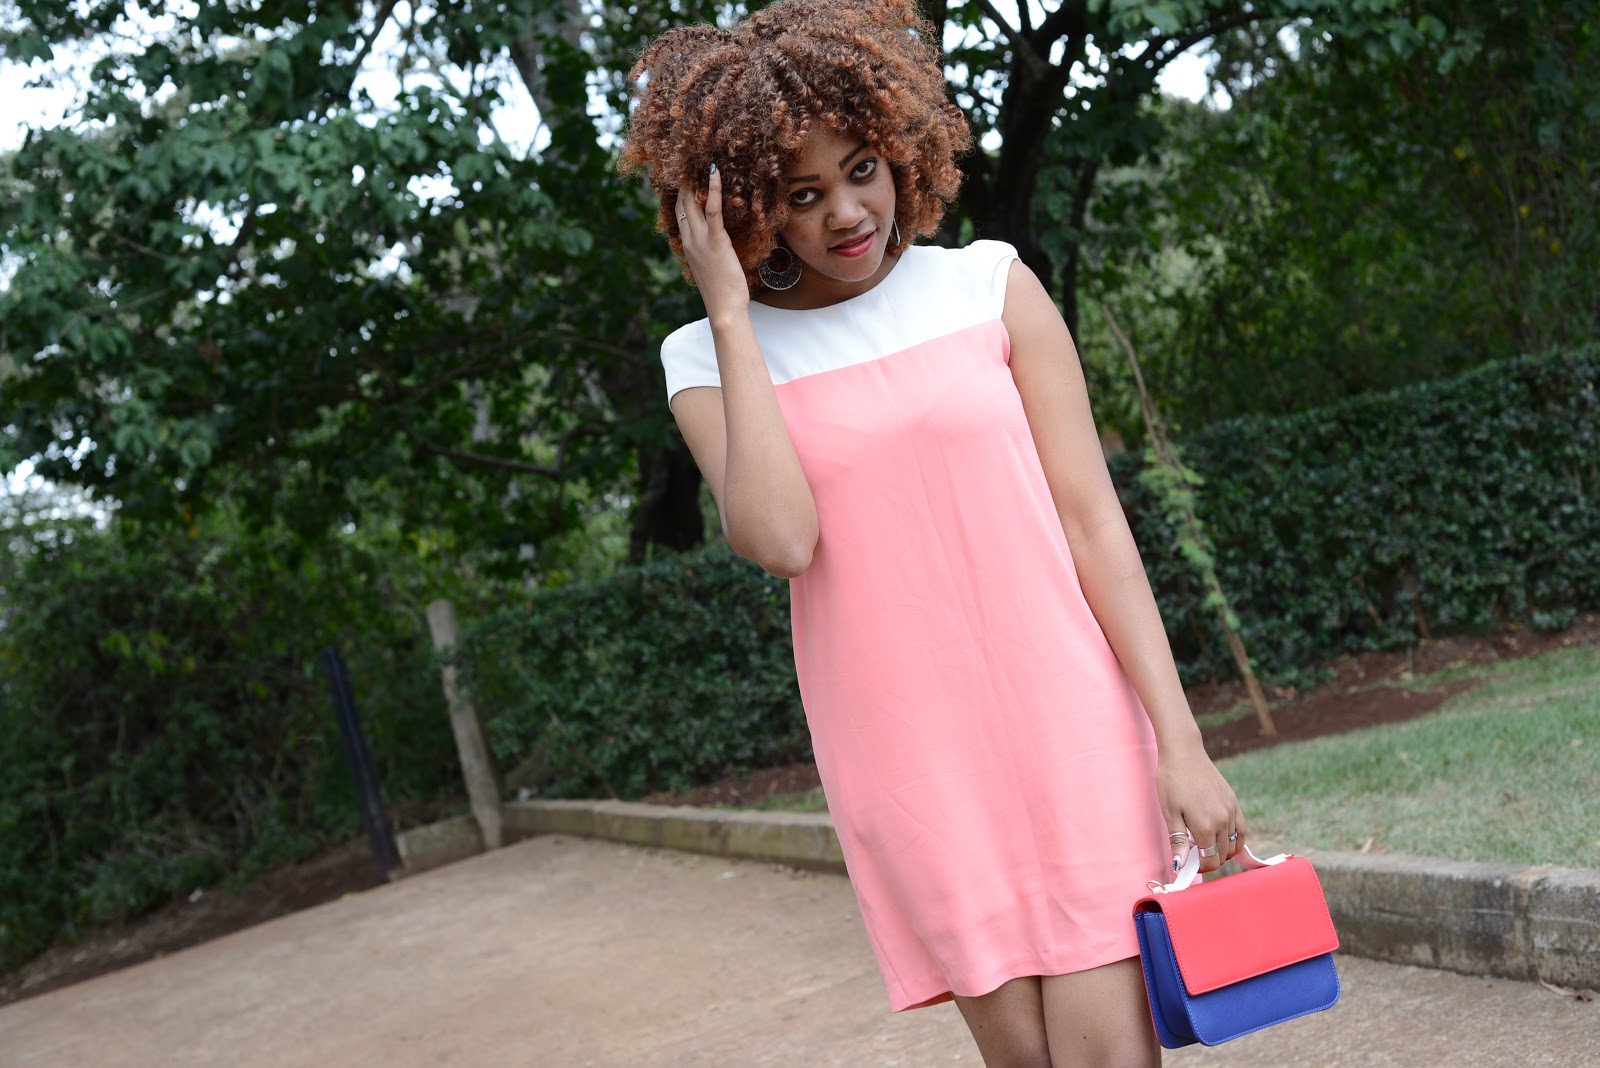 Sunkissed: Colour blocked dress & Strappy Heels